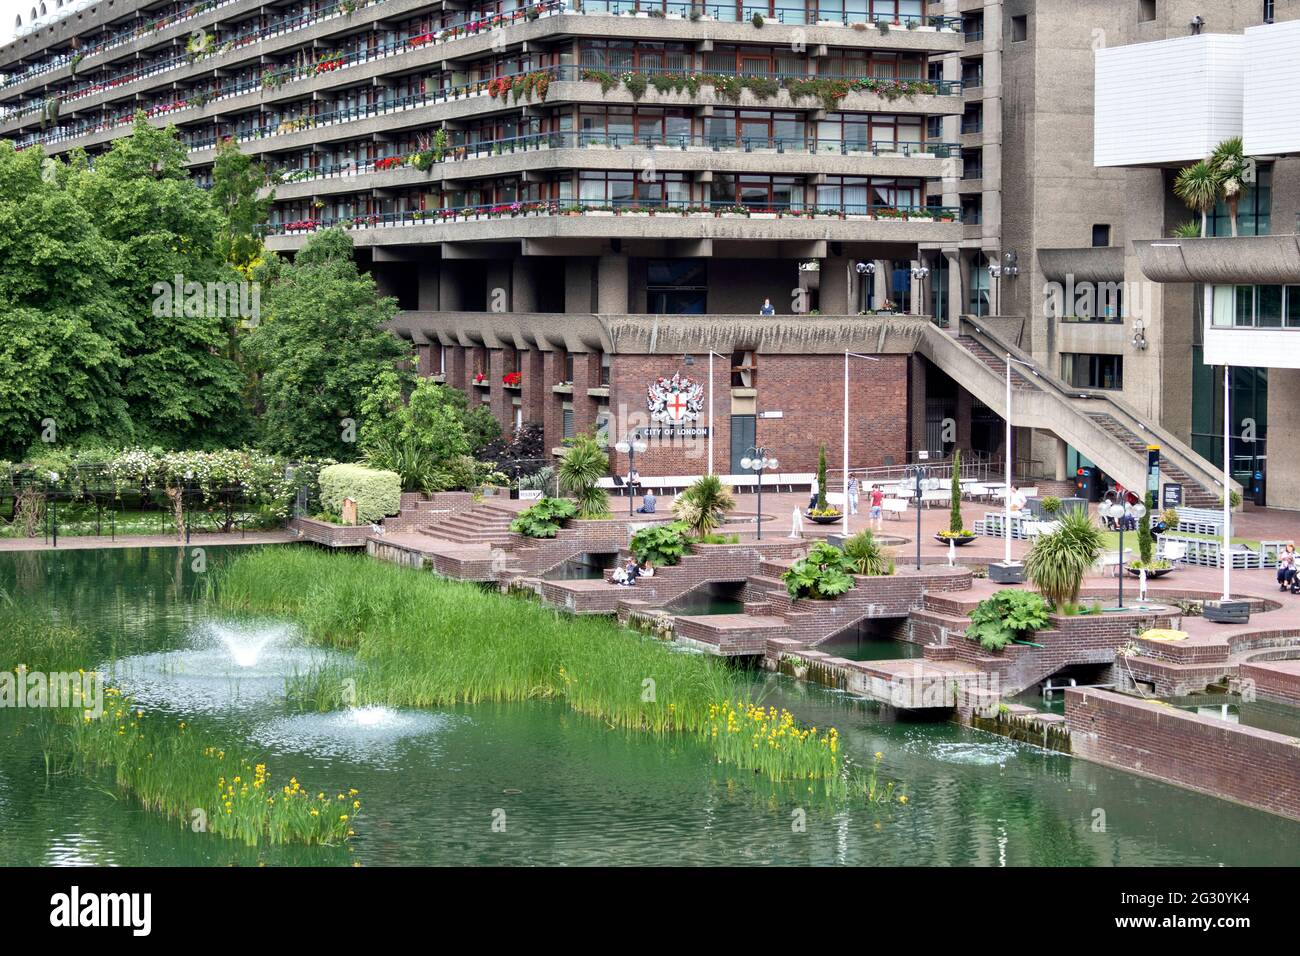 LONDON ENGLAND  BARBICAN CENTRE SILK STREET CITY OF LONDON THE LAKE WITH YELLOW IRIS FLOWERS FOUNTAINS AND THE TERRACE Stock Photo